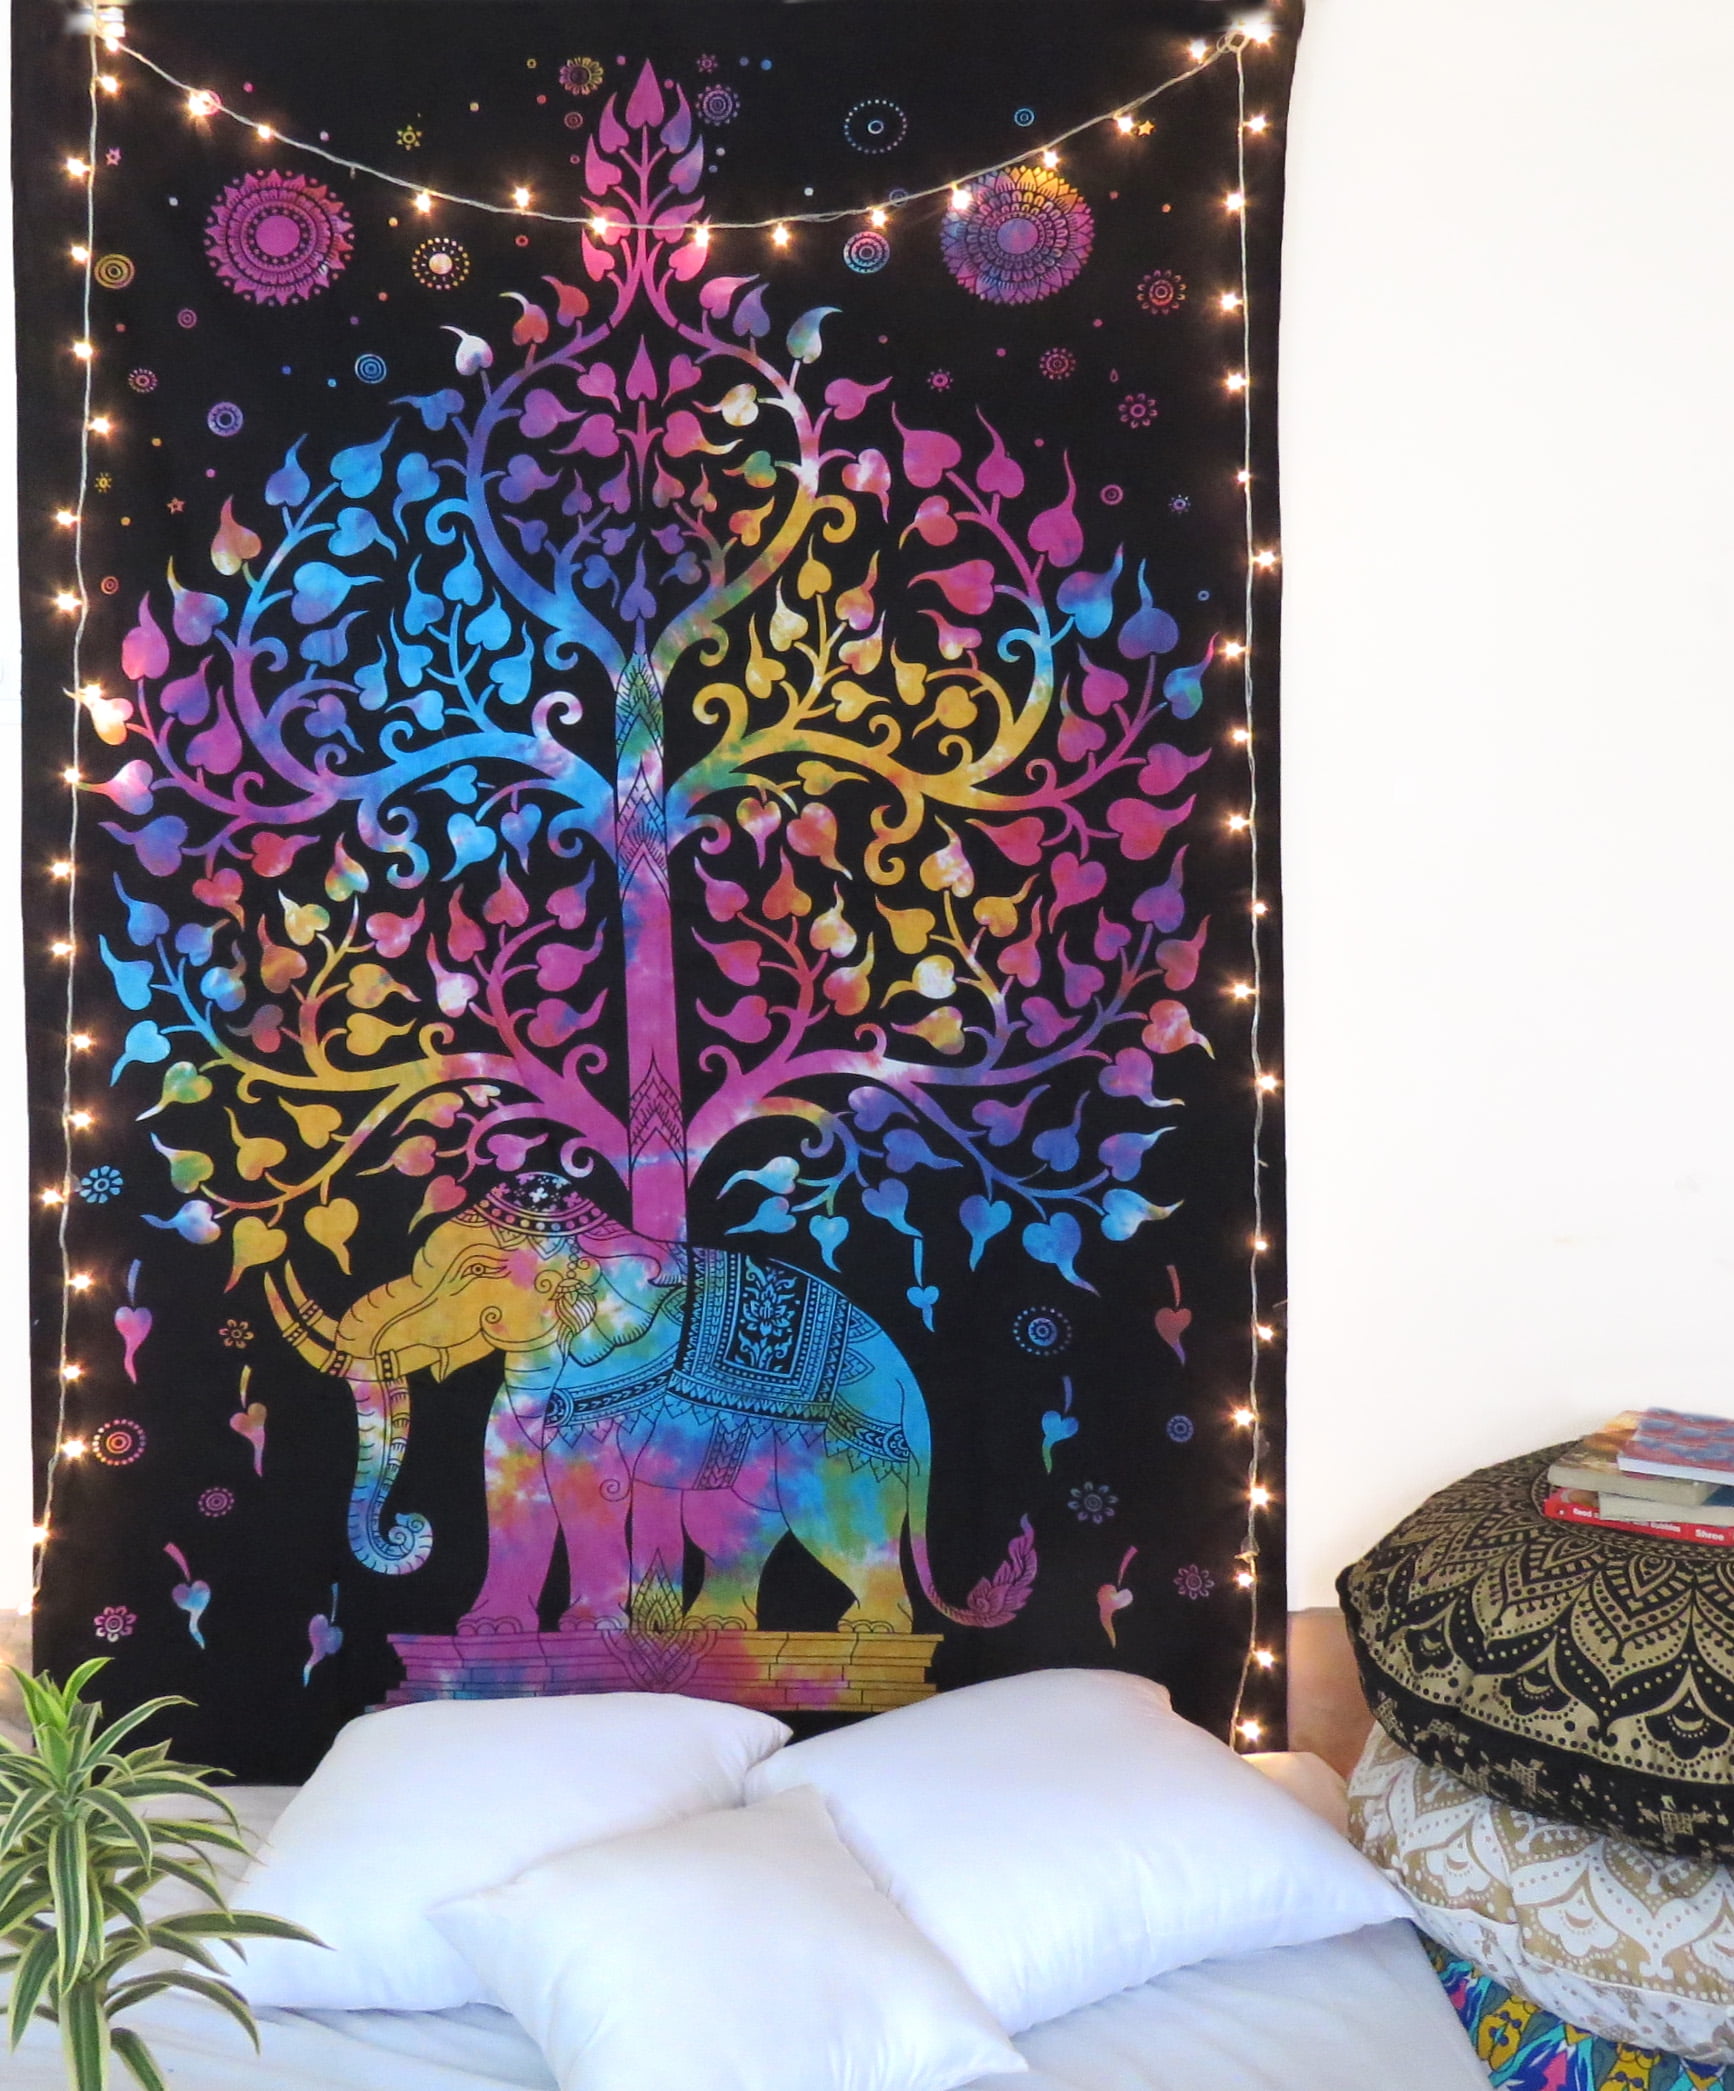 Tapestry Mandala Wall Hanging Hippie Elephant Psychedelic for Bedroom Home Decor 